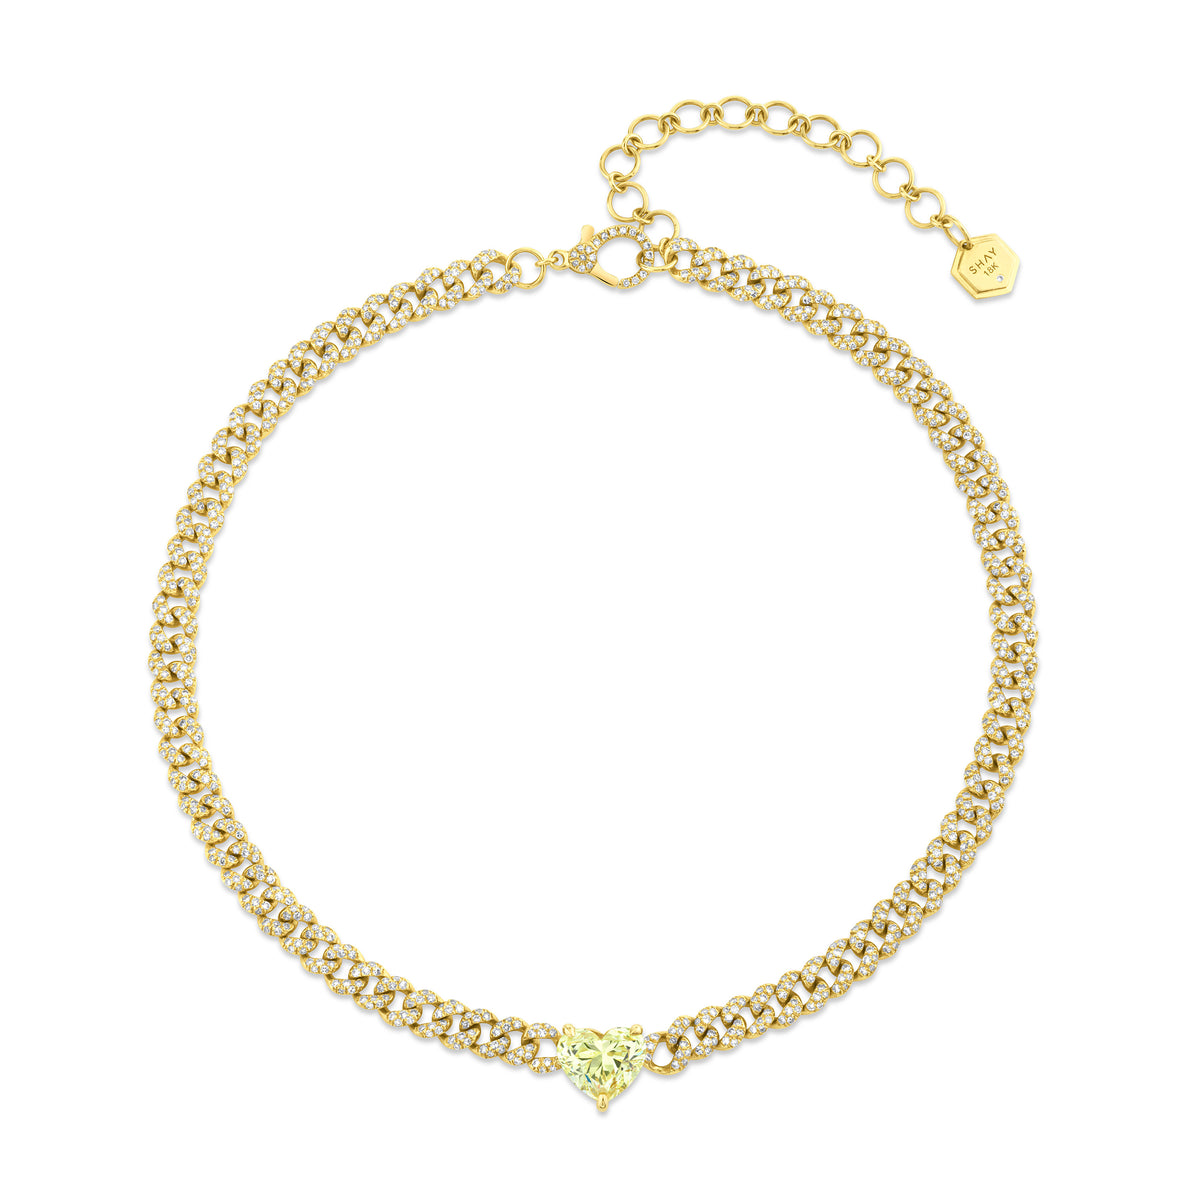 READY TO SHIP YELLOW DIAMOND HEART PAVE MINI LINK NECKLACE